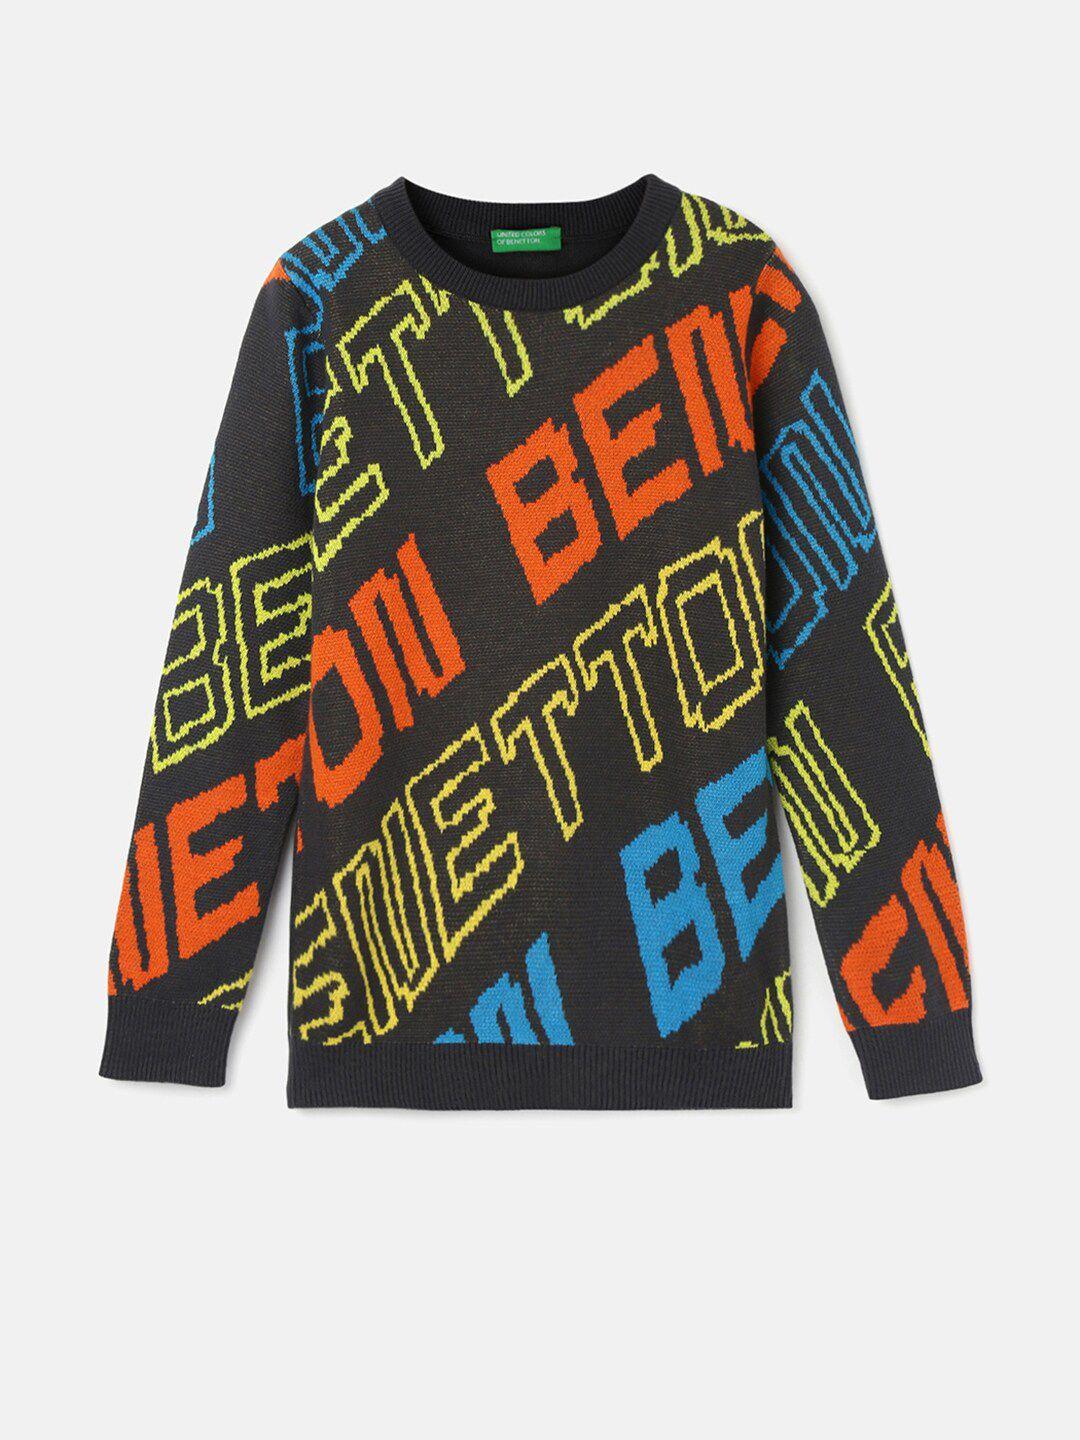 united colors of benetton boys typography printed cotton pullover